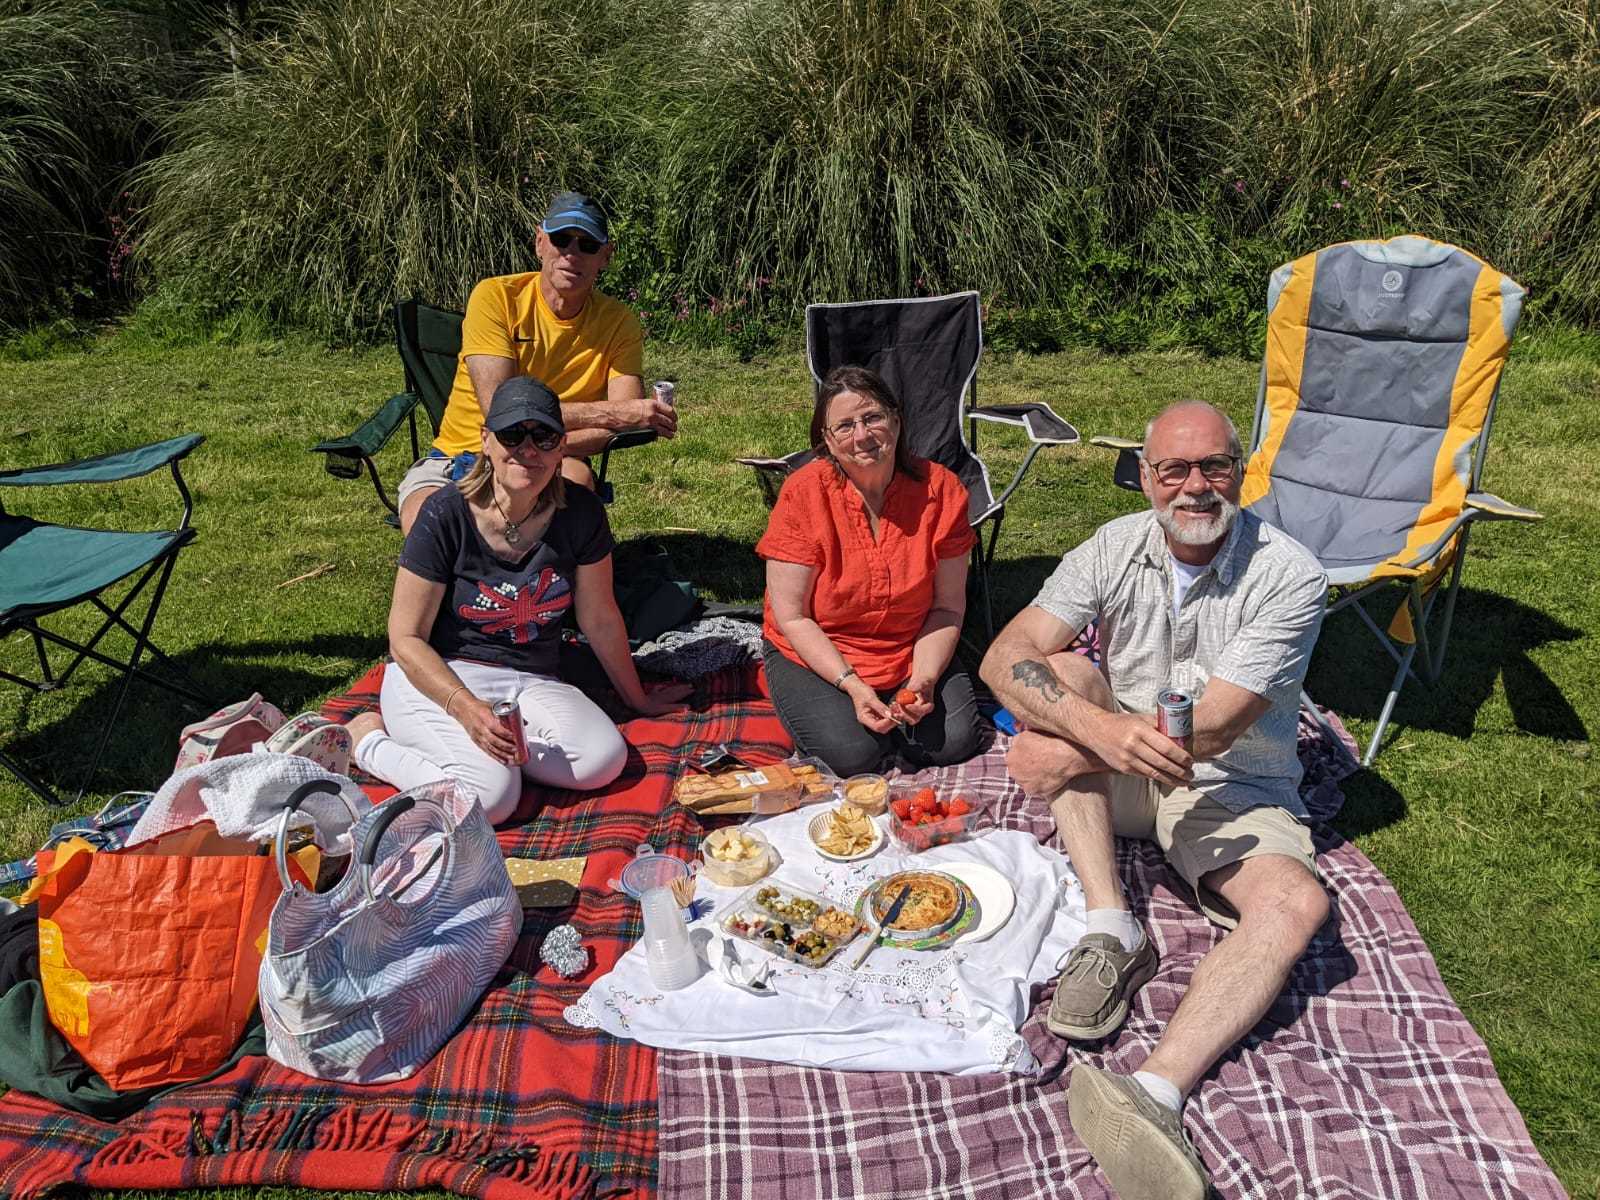 Gary, Jayne, Ros and Paul all from Porthleven enjoying their Jubilee picnic. Photo: Kate Lockett